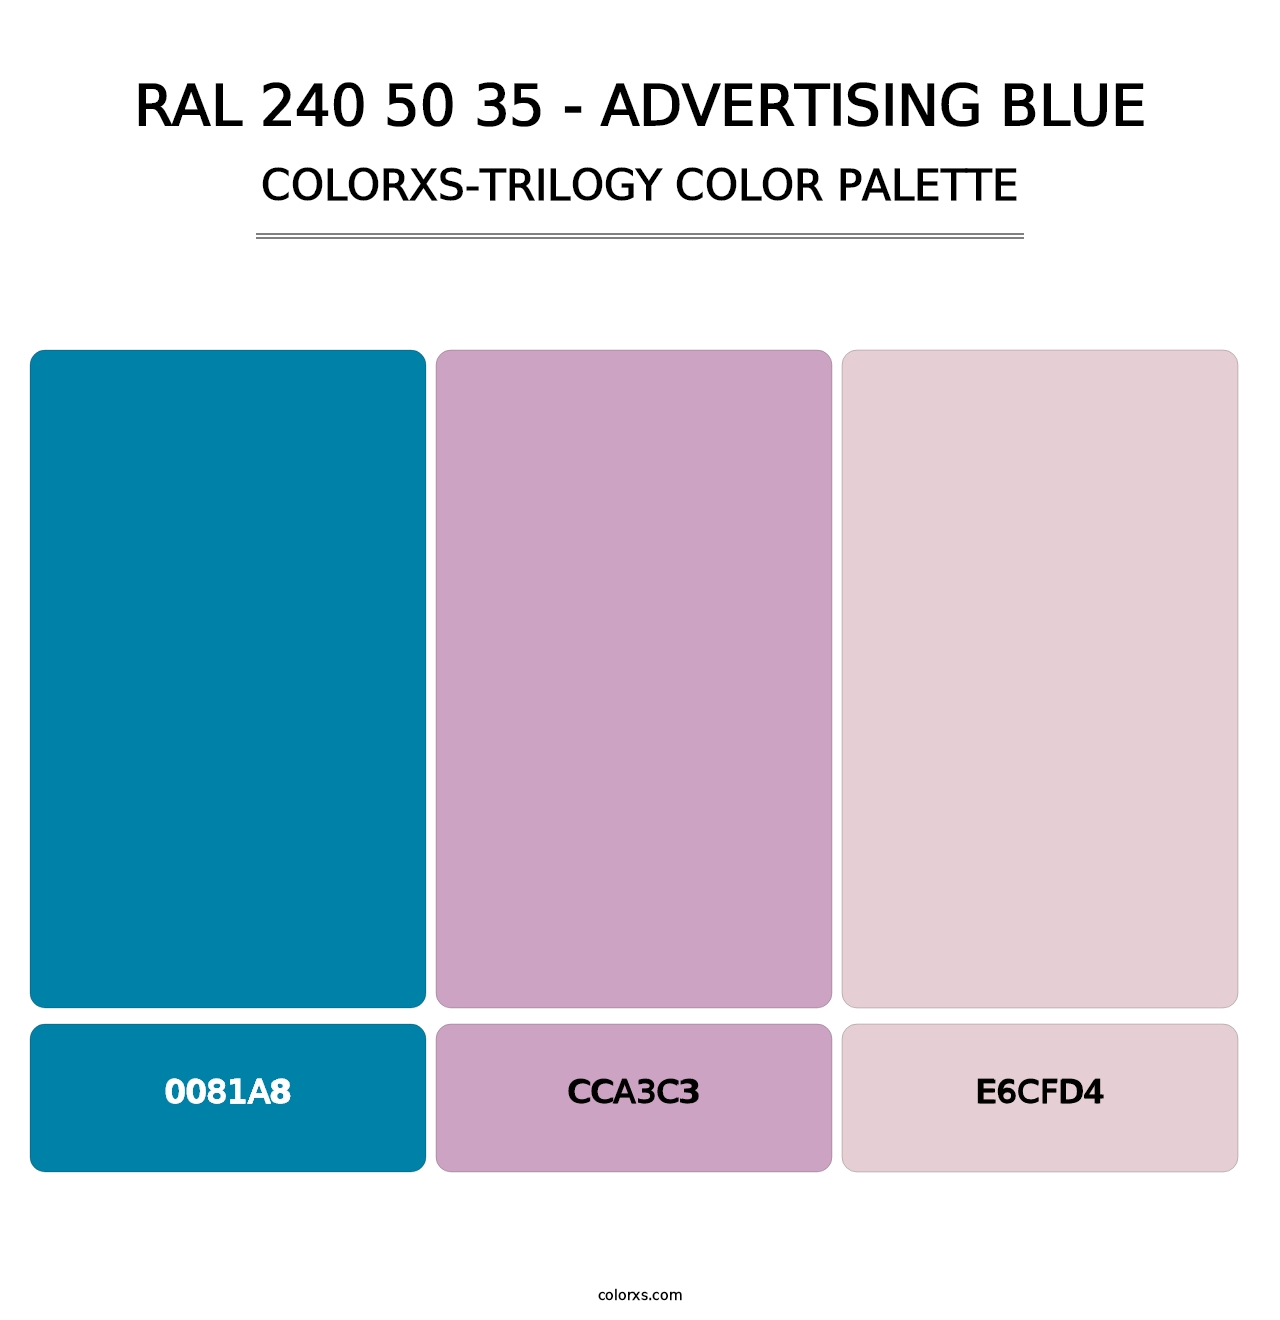 RAL 240 50 35 - Advertising Blue - Colorxs Trilogy Palette